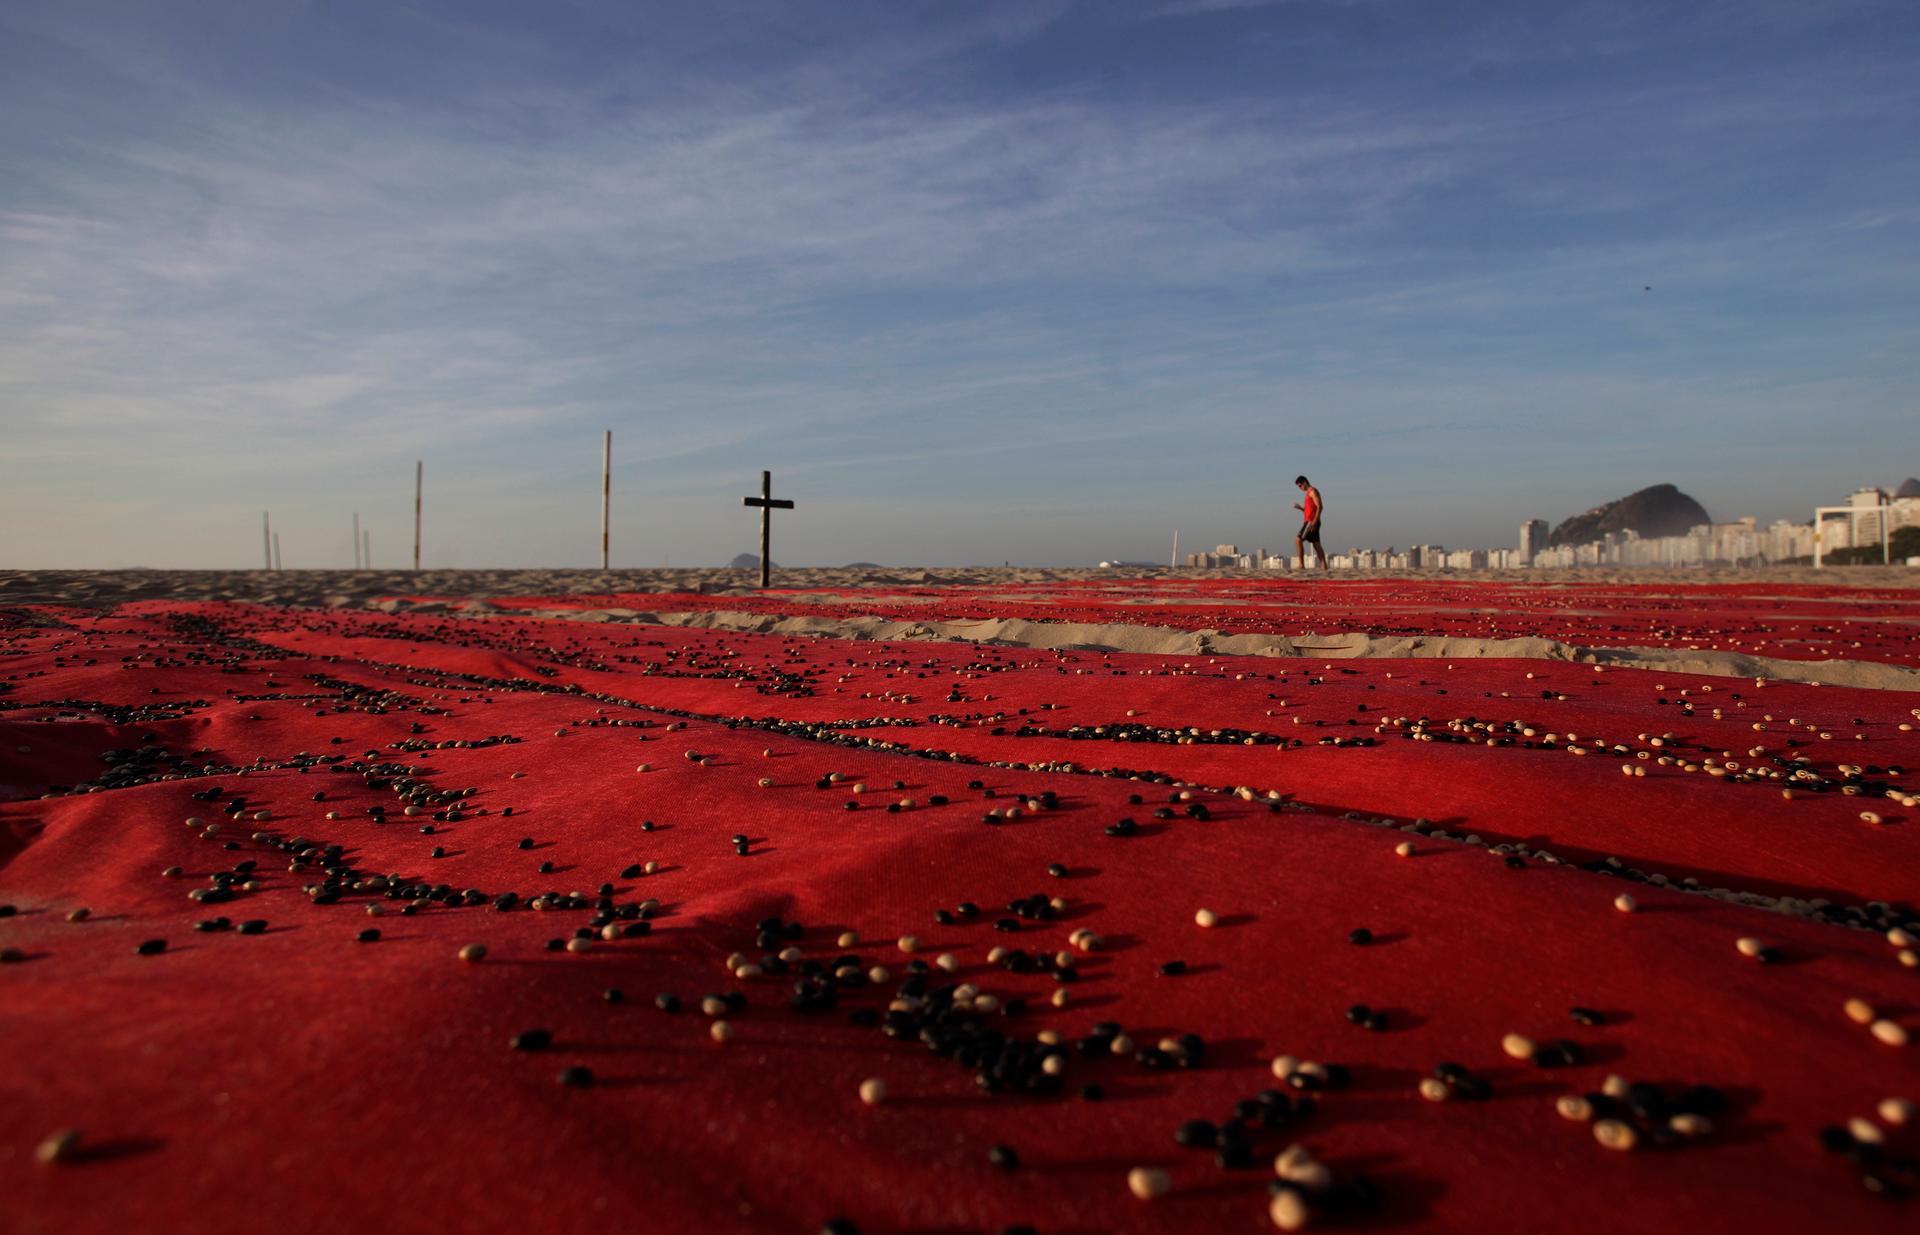 To raise awareness of the higher murder rate in Brazil, the non-governmental group Rio de Paz placed about 500,000 beans over red sheets to represent the number of people killed over the the previous 10 years in Brazil. Photo taken in Rio de Janeiro, Dec.